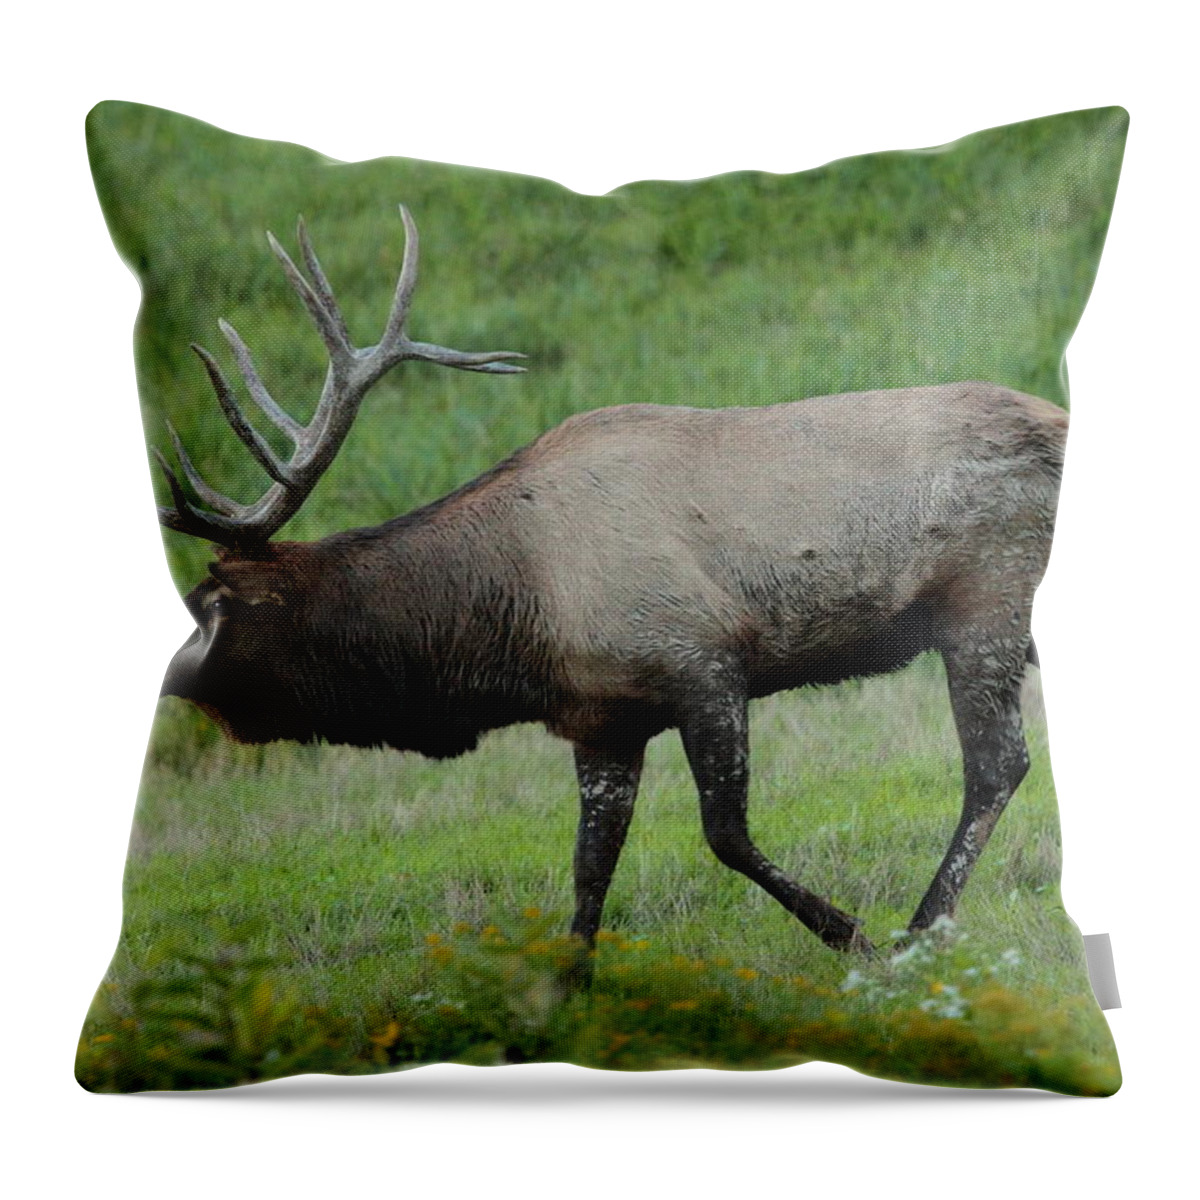 Elk Throw Pillow featuring the photograph Wpiti In Rut by Bruce J Robinson